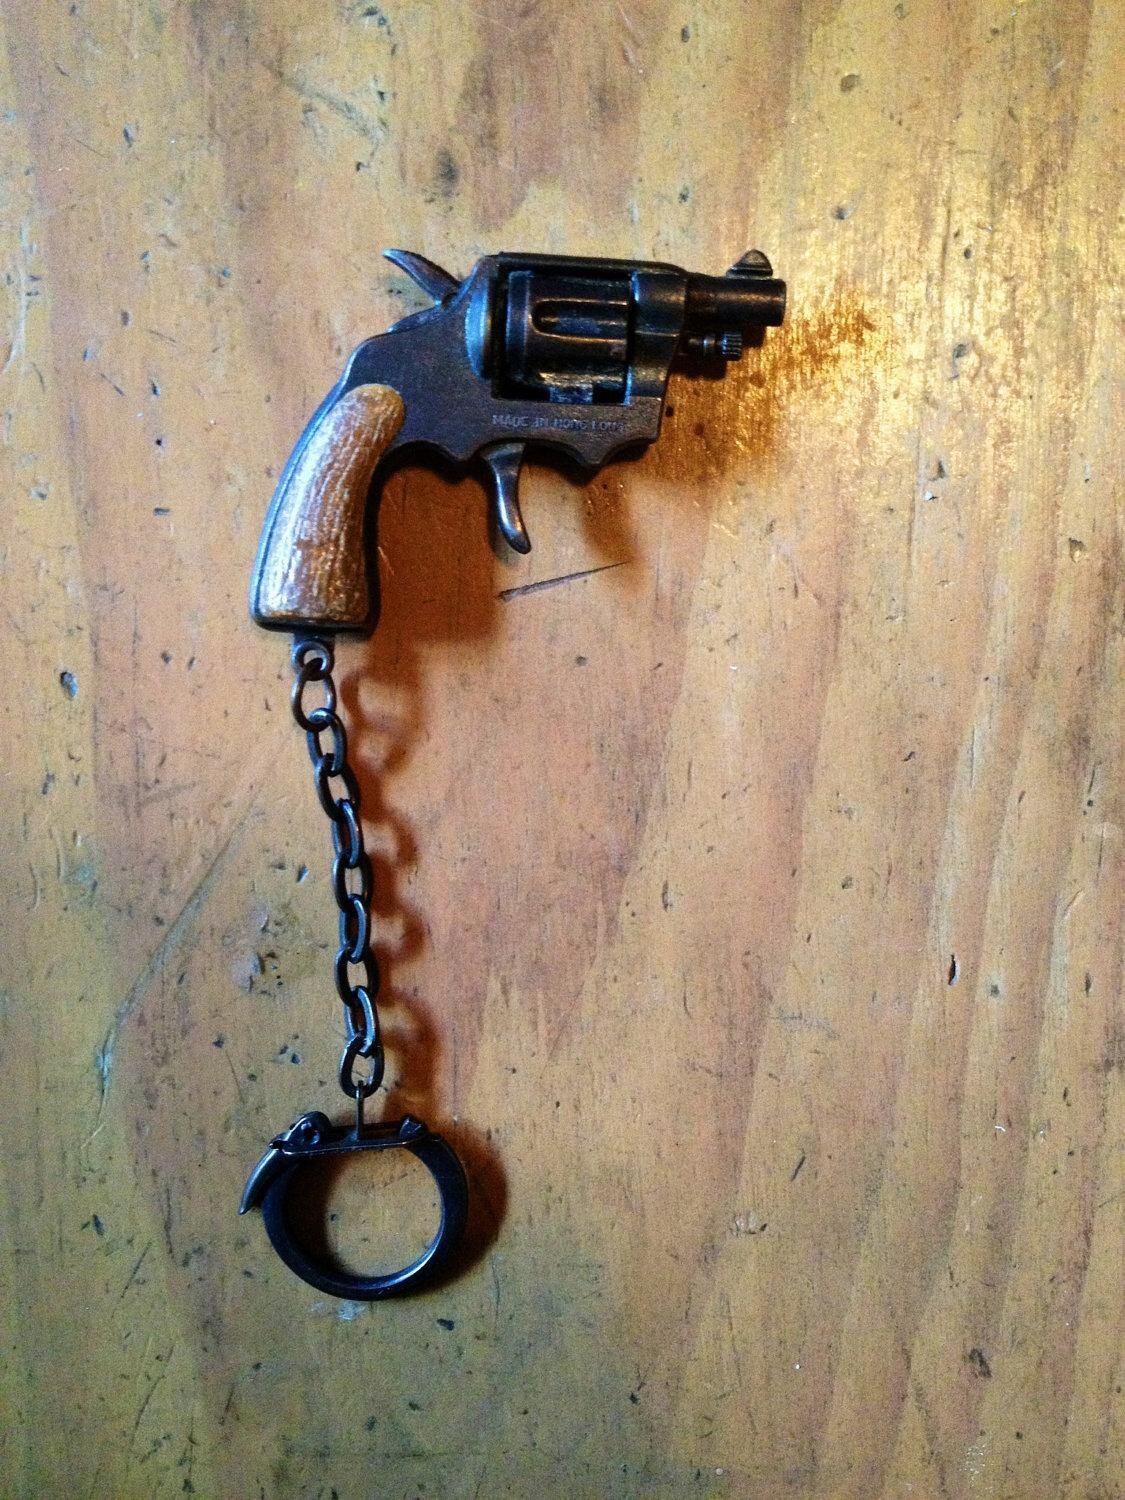 Not American? Can't Legally Get a Gun? Get One for Your Keychain!